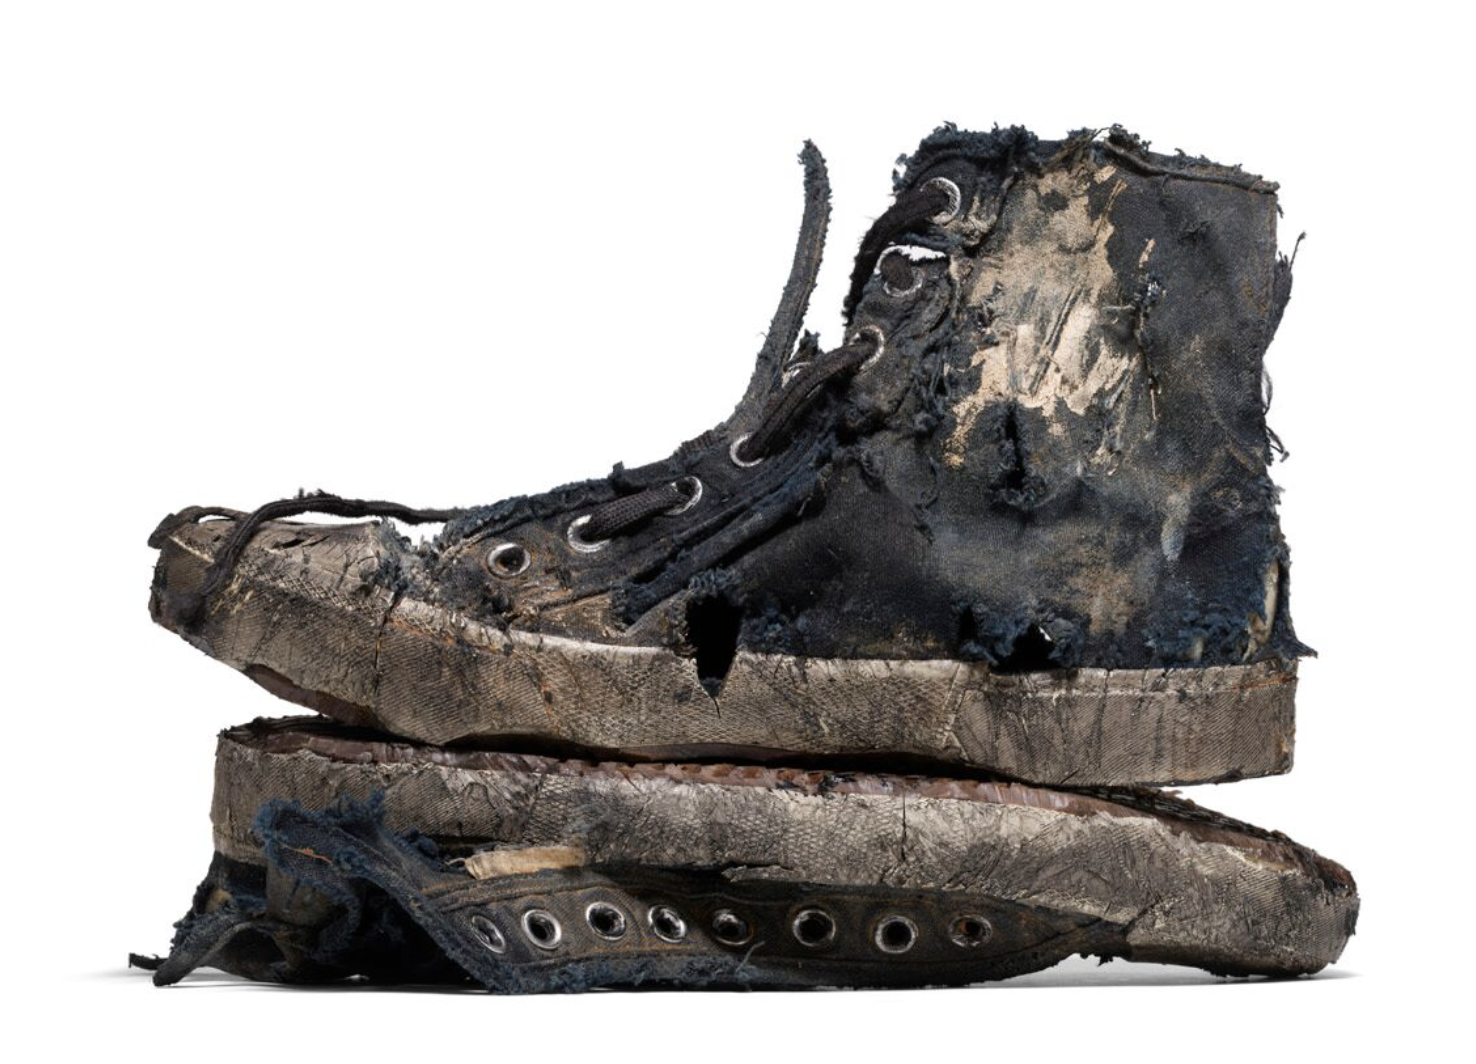 Balenciaga criticised for selling filthy garbage sneakers for S$2,590 -   - News from Singapore, Asia and around the world